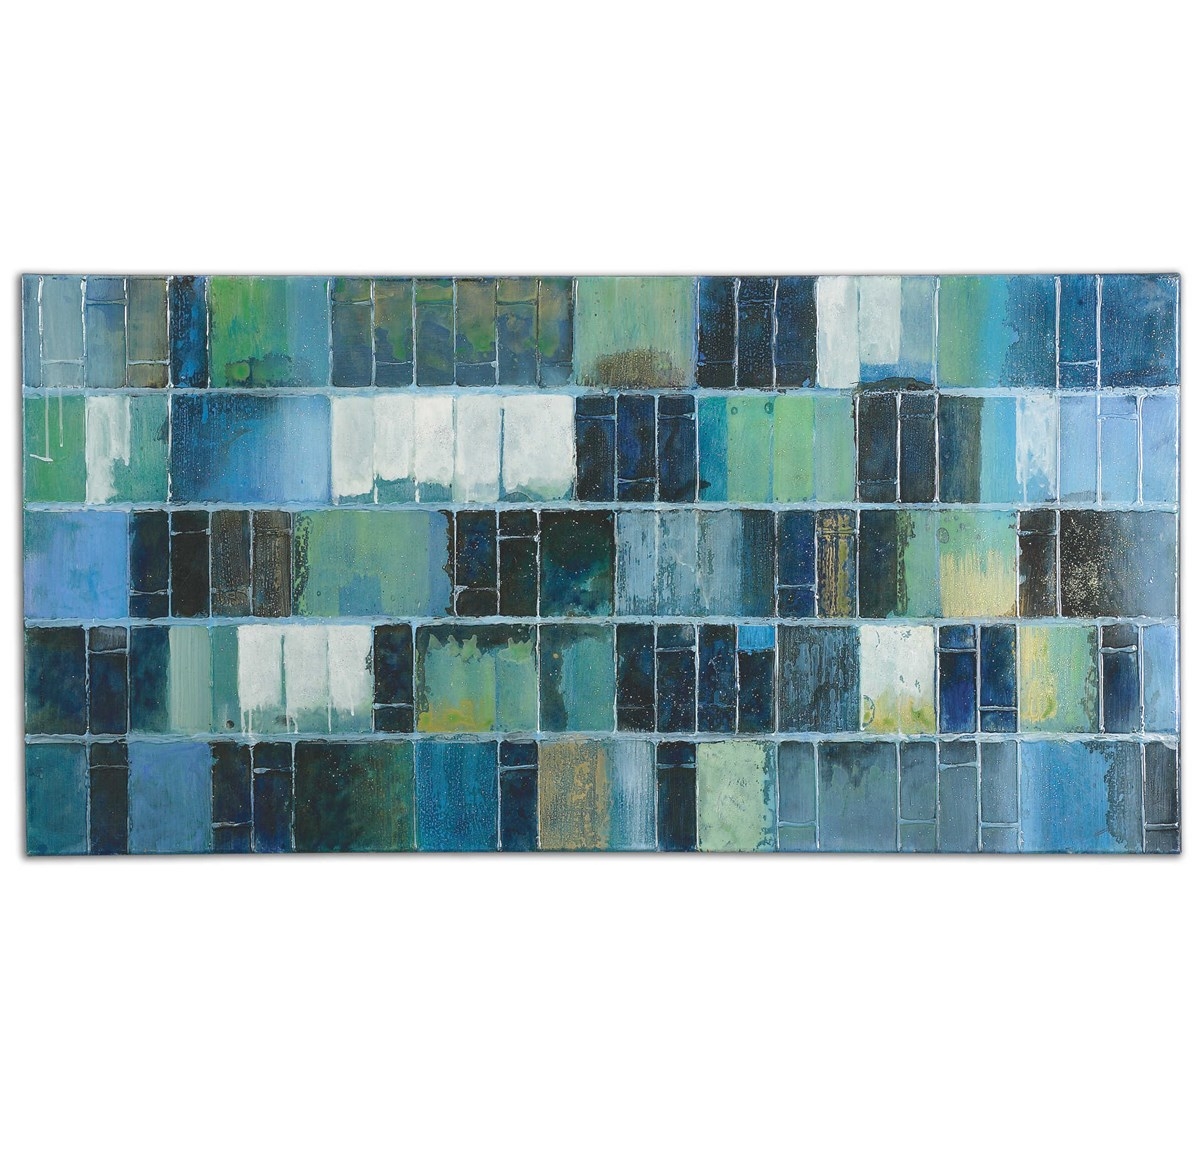 GLASS TILES HAND PAINTED CANVAS - Image 0